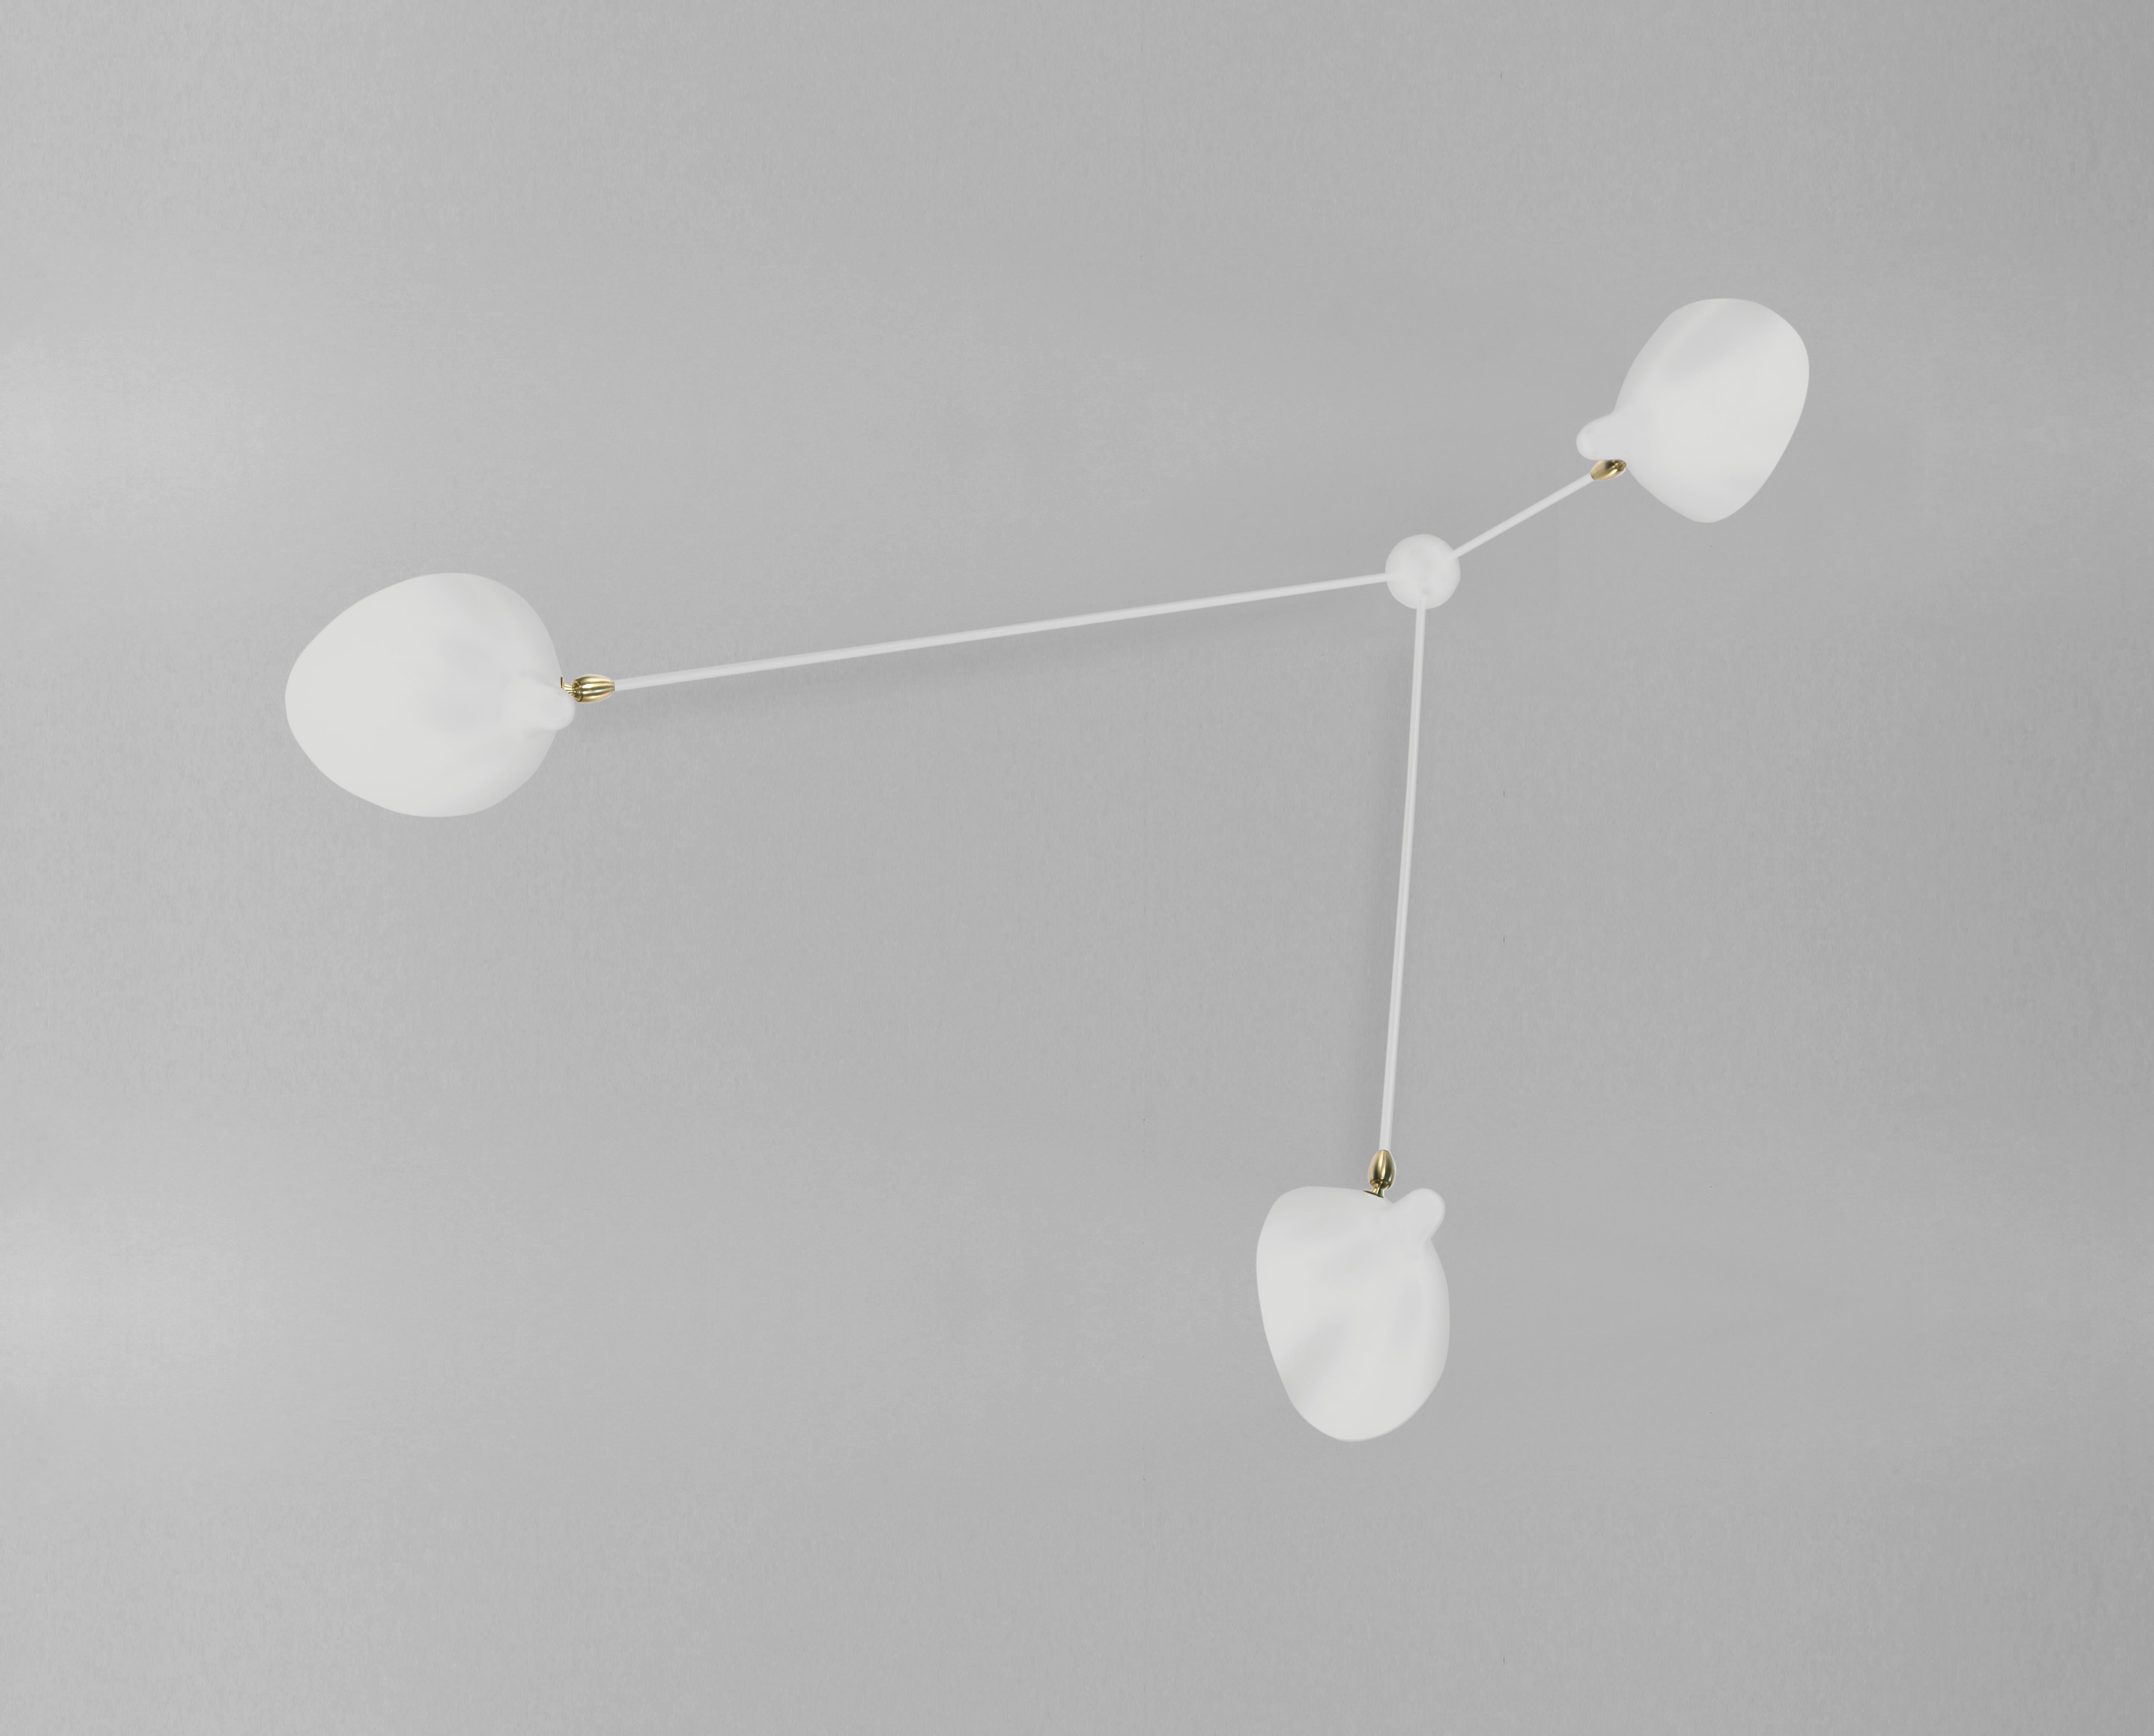 Wall ceiling lamp model 'Three Fixed Arms Spider Ceiling Lamp' designed by Serge Mouille in 1952.

Manufactured by Editions Serge Mouille in France. The production of lamps, wall lights and floor lamps are manufactured using craftsman’s techniques